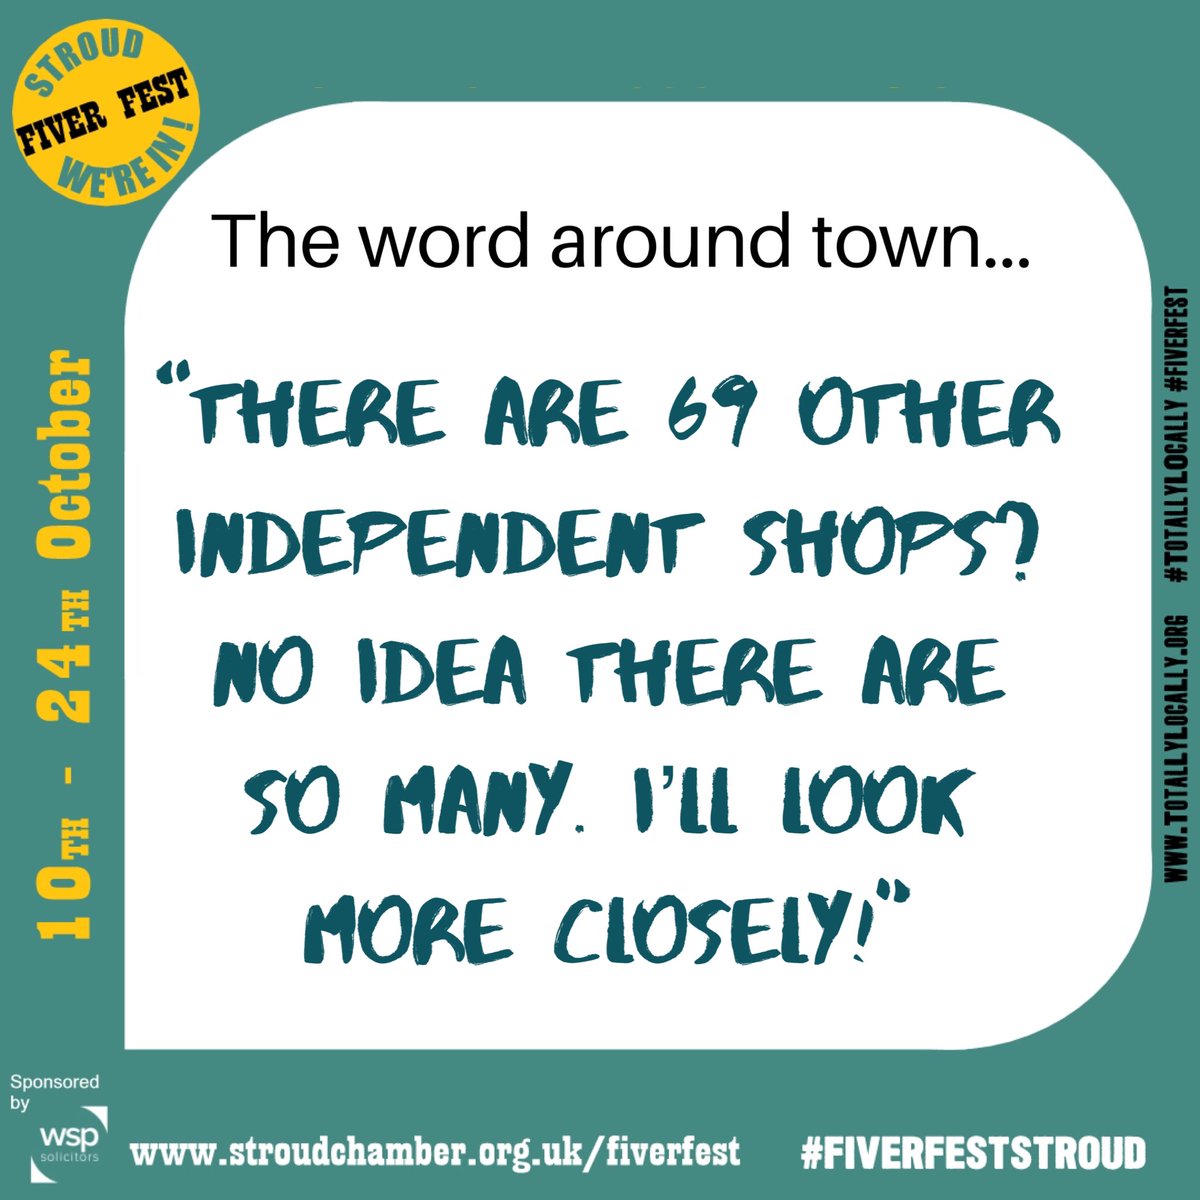 We have 70 participants in Stroud Fiver Fest & there are more independent businesses than that.

Take a look around & explore some of the roads you don’t normally go down. You may be surprised by what’s there to discover 👍

#StroudFiverFest #InStroud #Stroud #ShopLocal